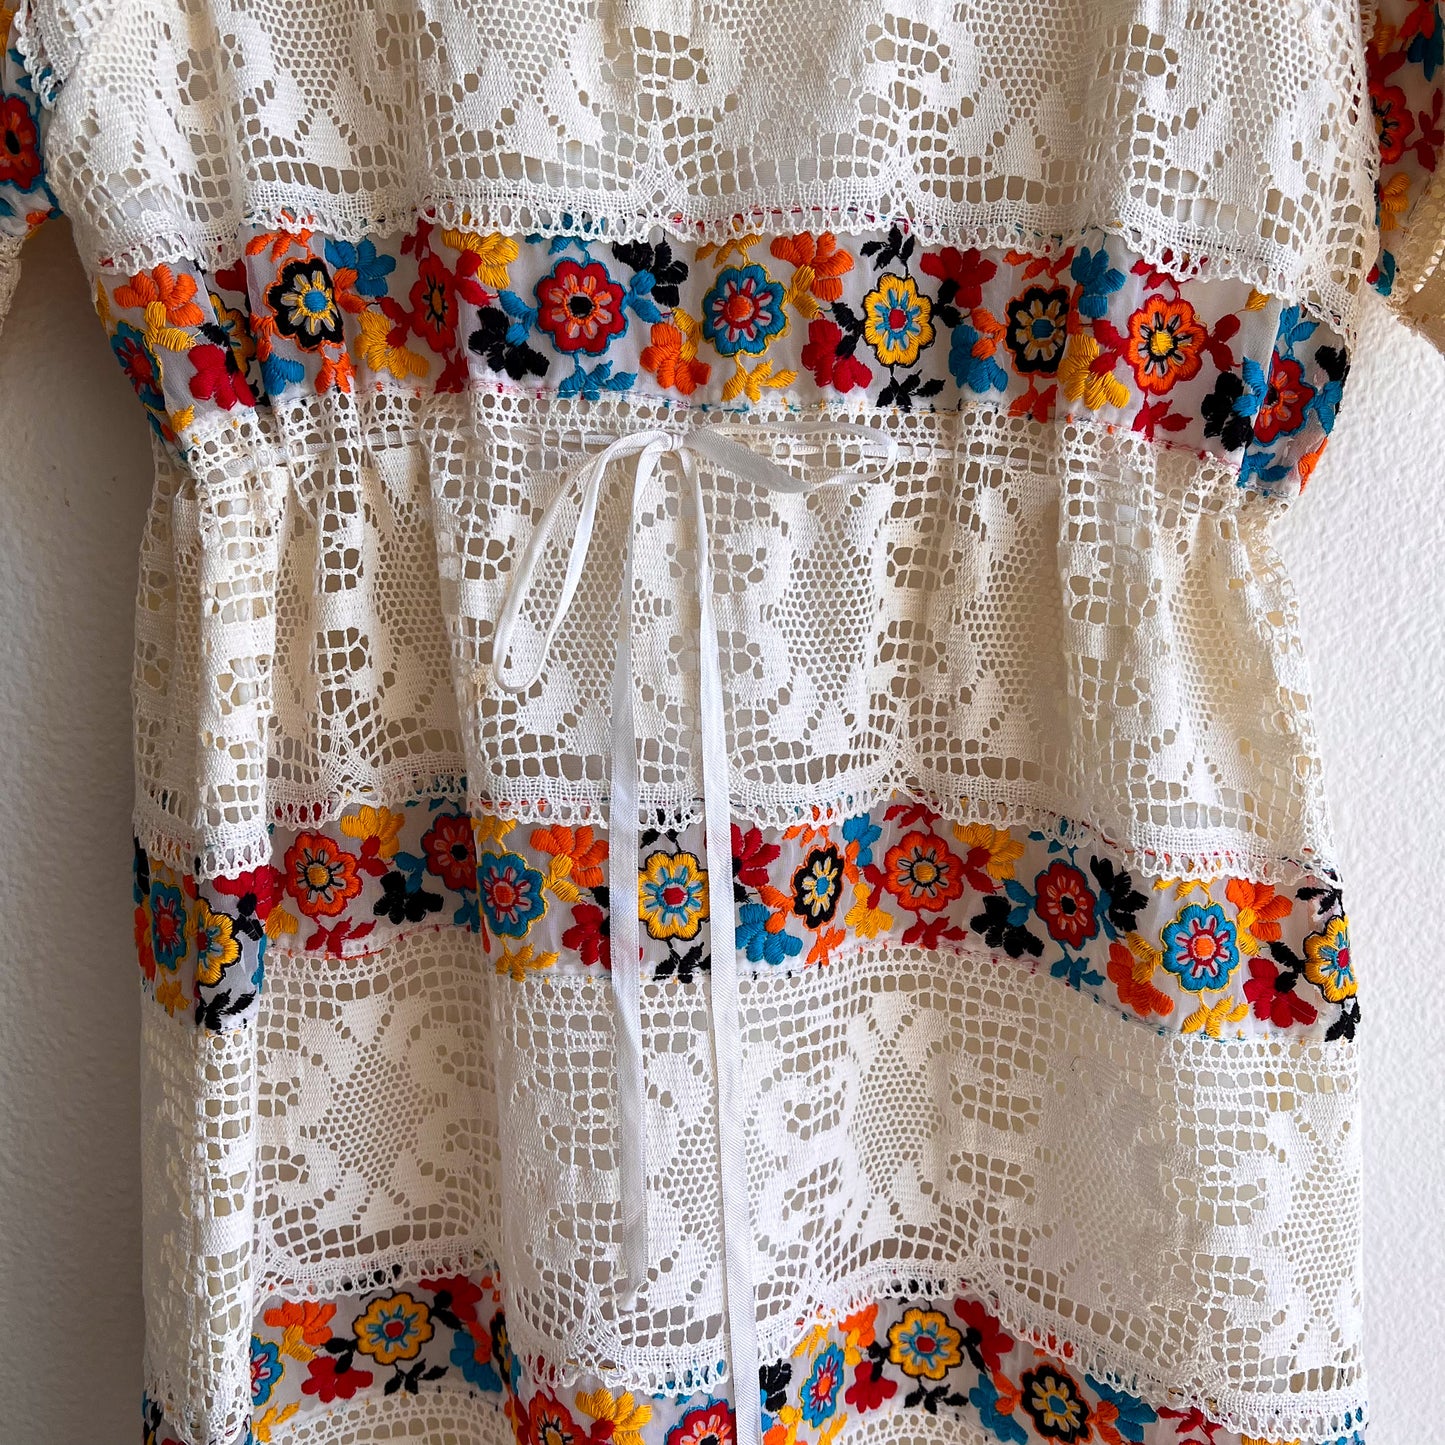 1970s Crochet Summer Dress With Floral Embroidery (S/M)